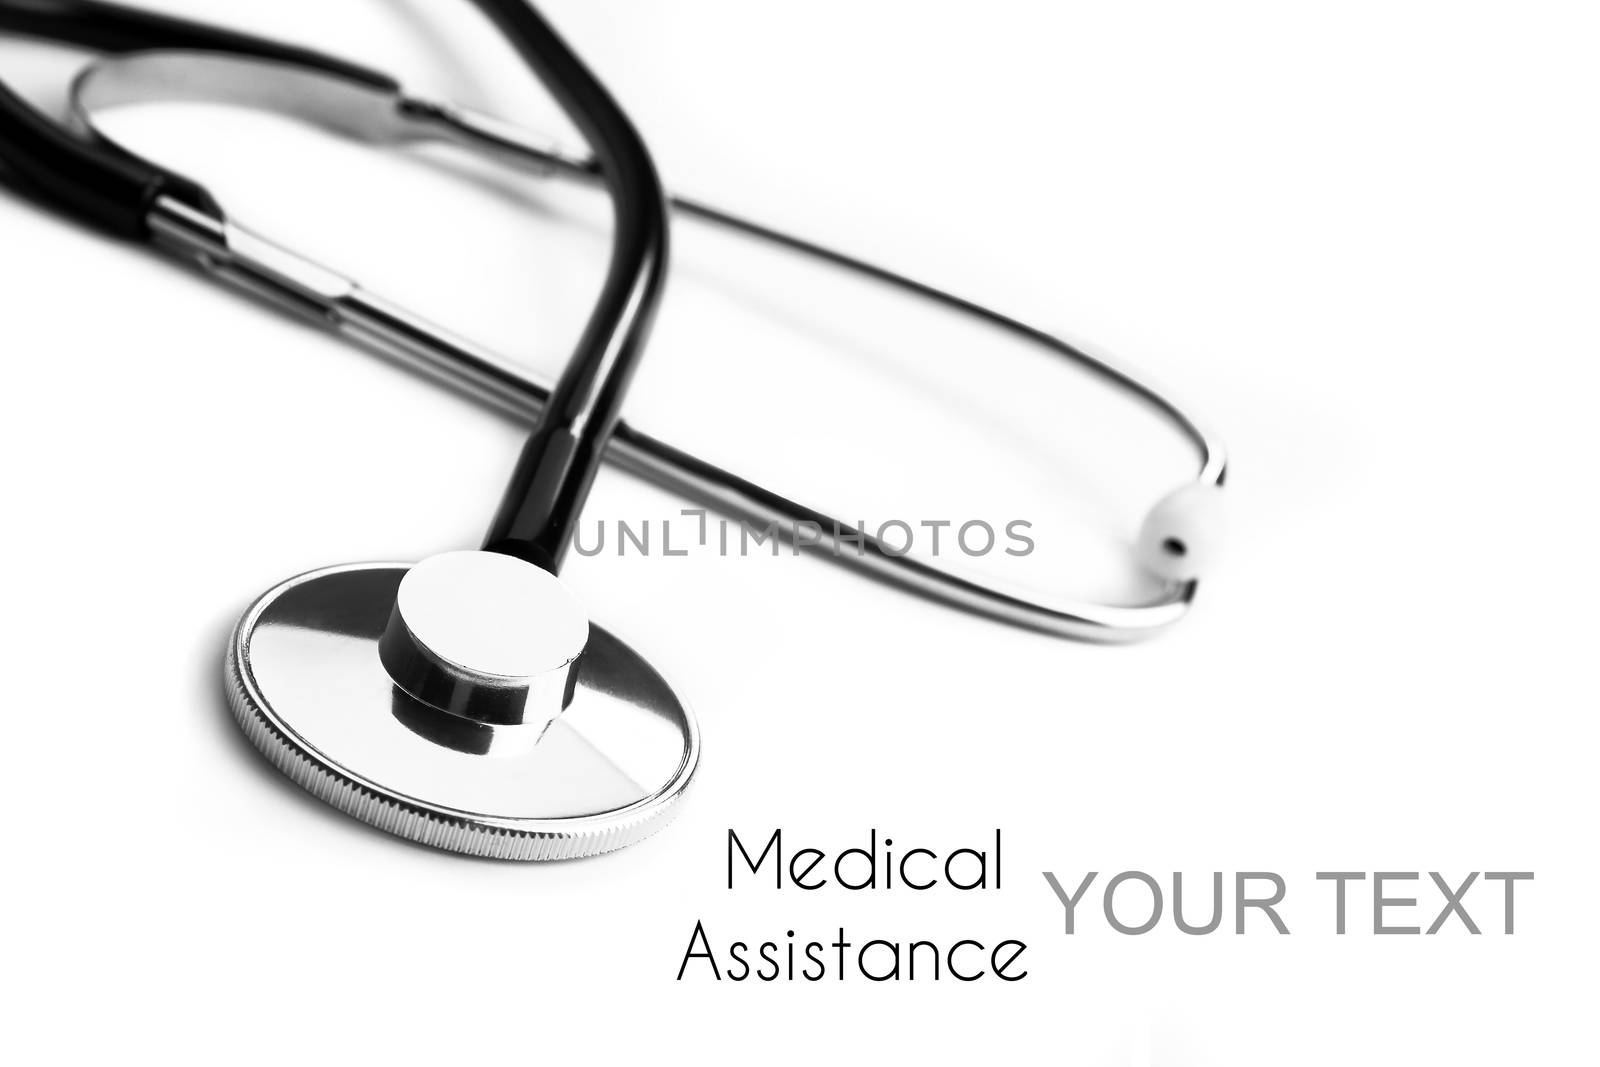 Stethoscope background for medical assistance